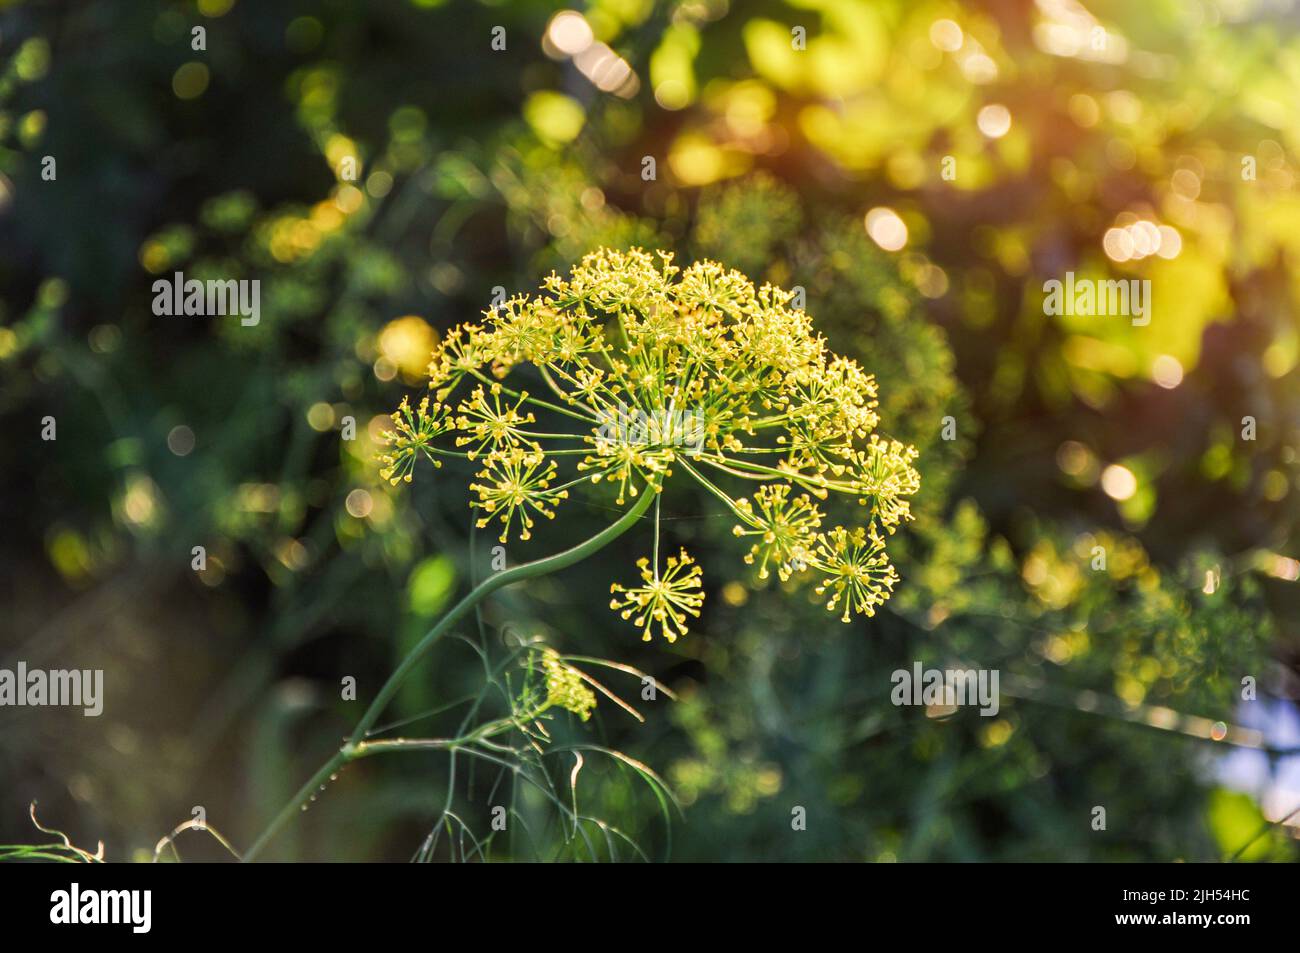 Dill (Anethum graveolens), umbelliferous aromatic plant with umbrella-shaped clusters of yellow flowers Stock Photo